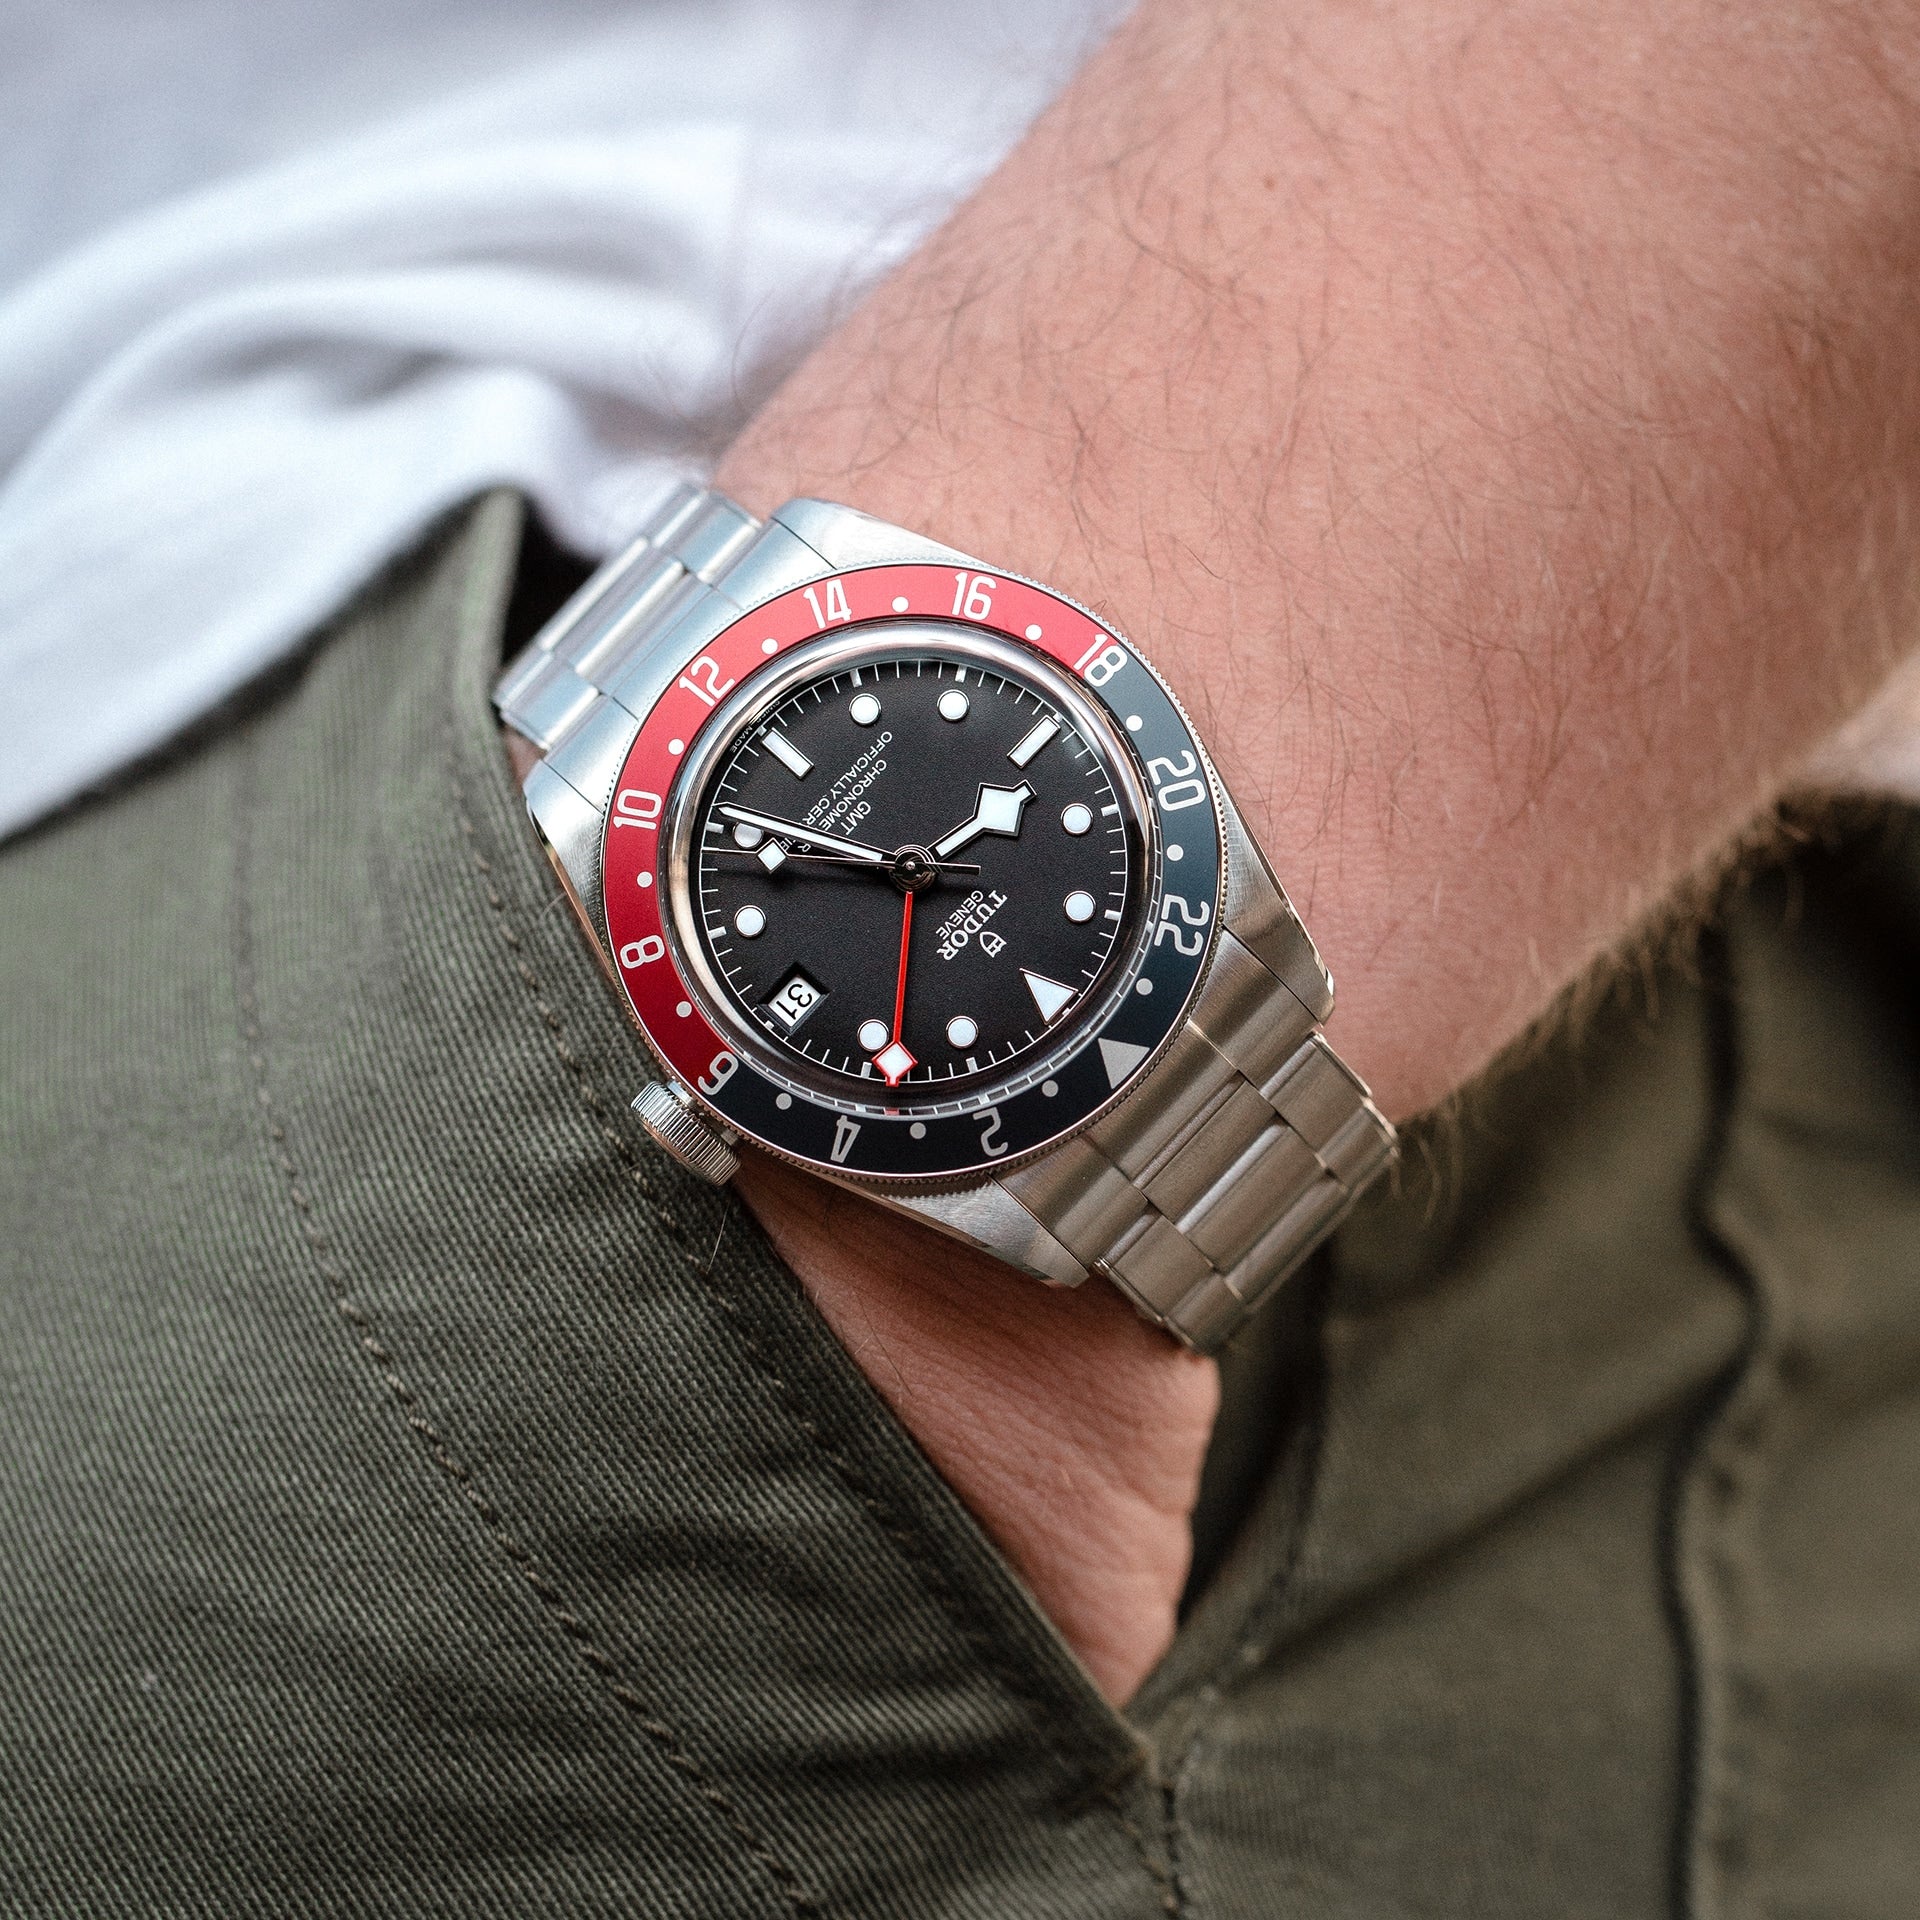 Tudor Black Bay GMT, Stainless Steel, 41mm, Ref# M79830RB-0001, Watch on hand